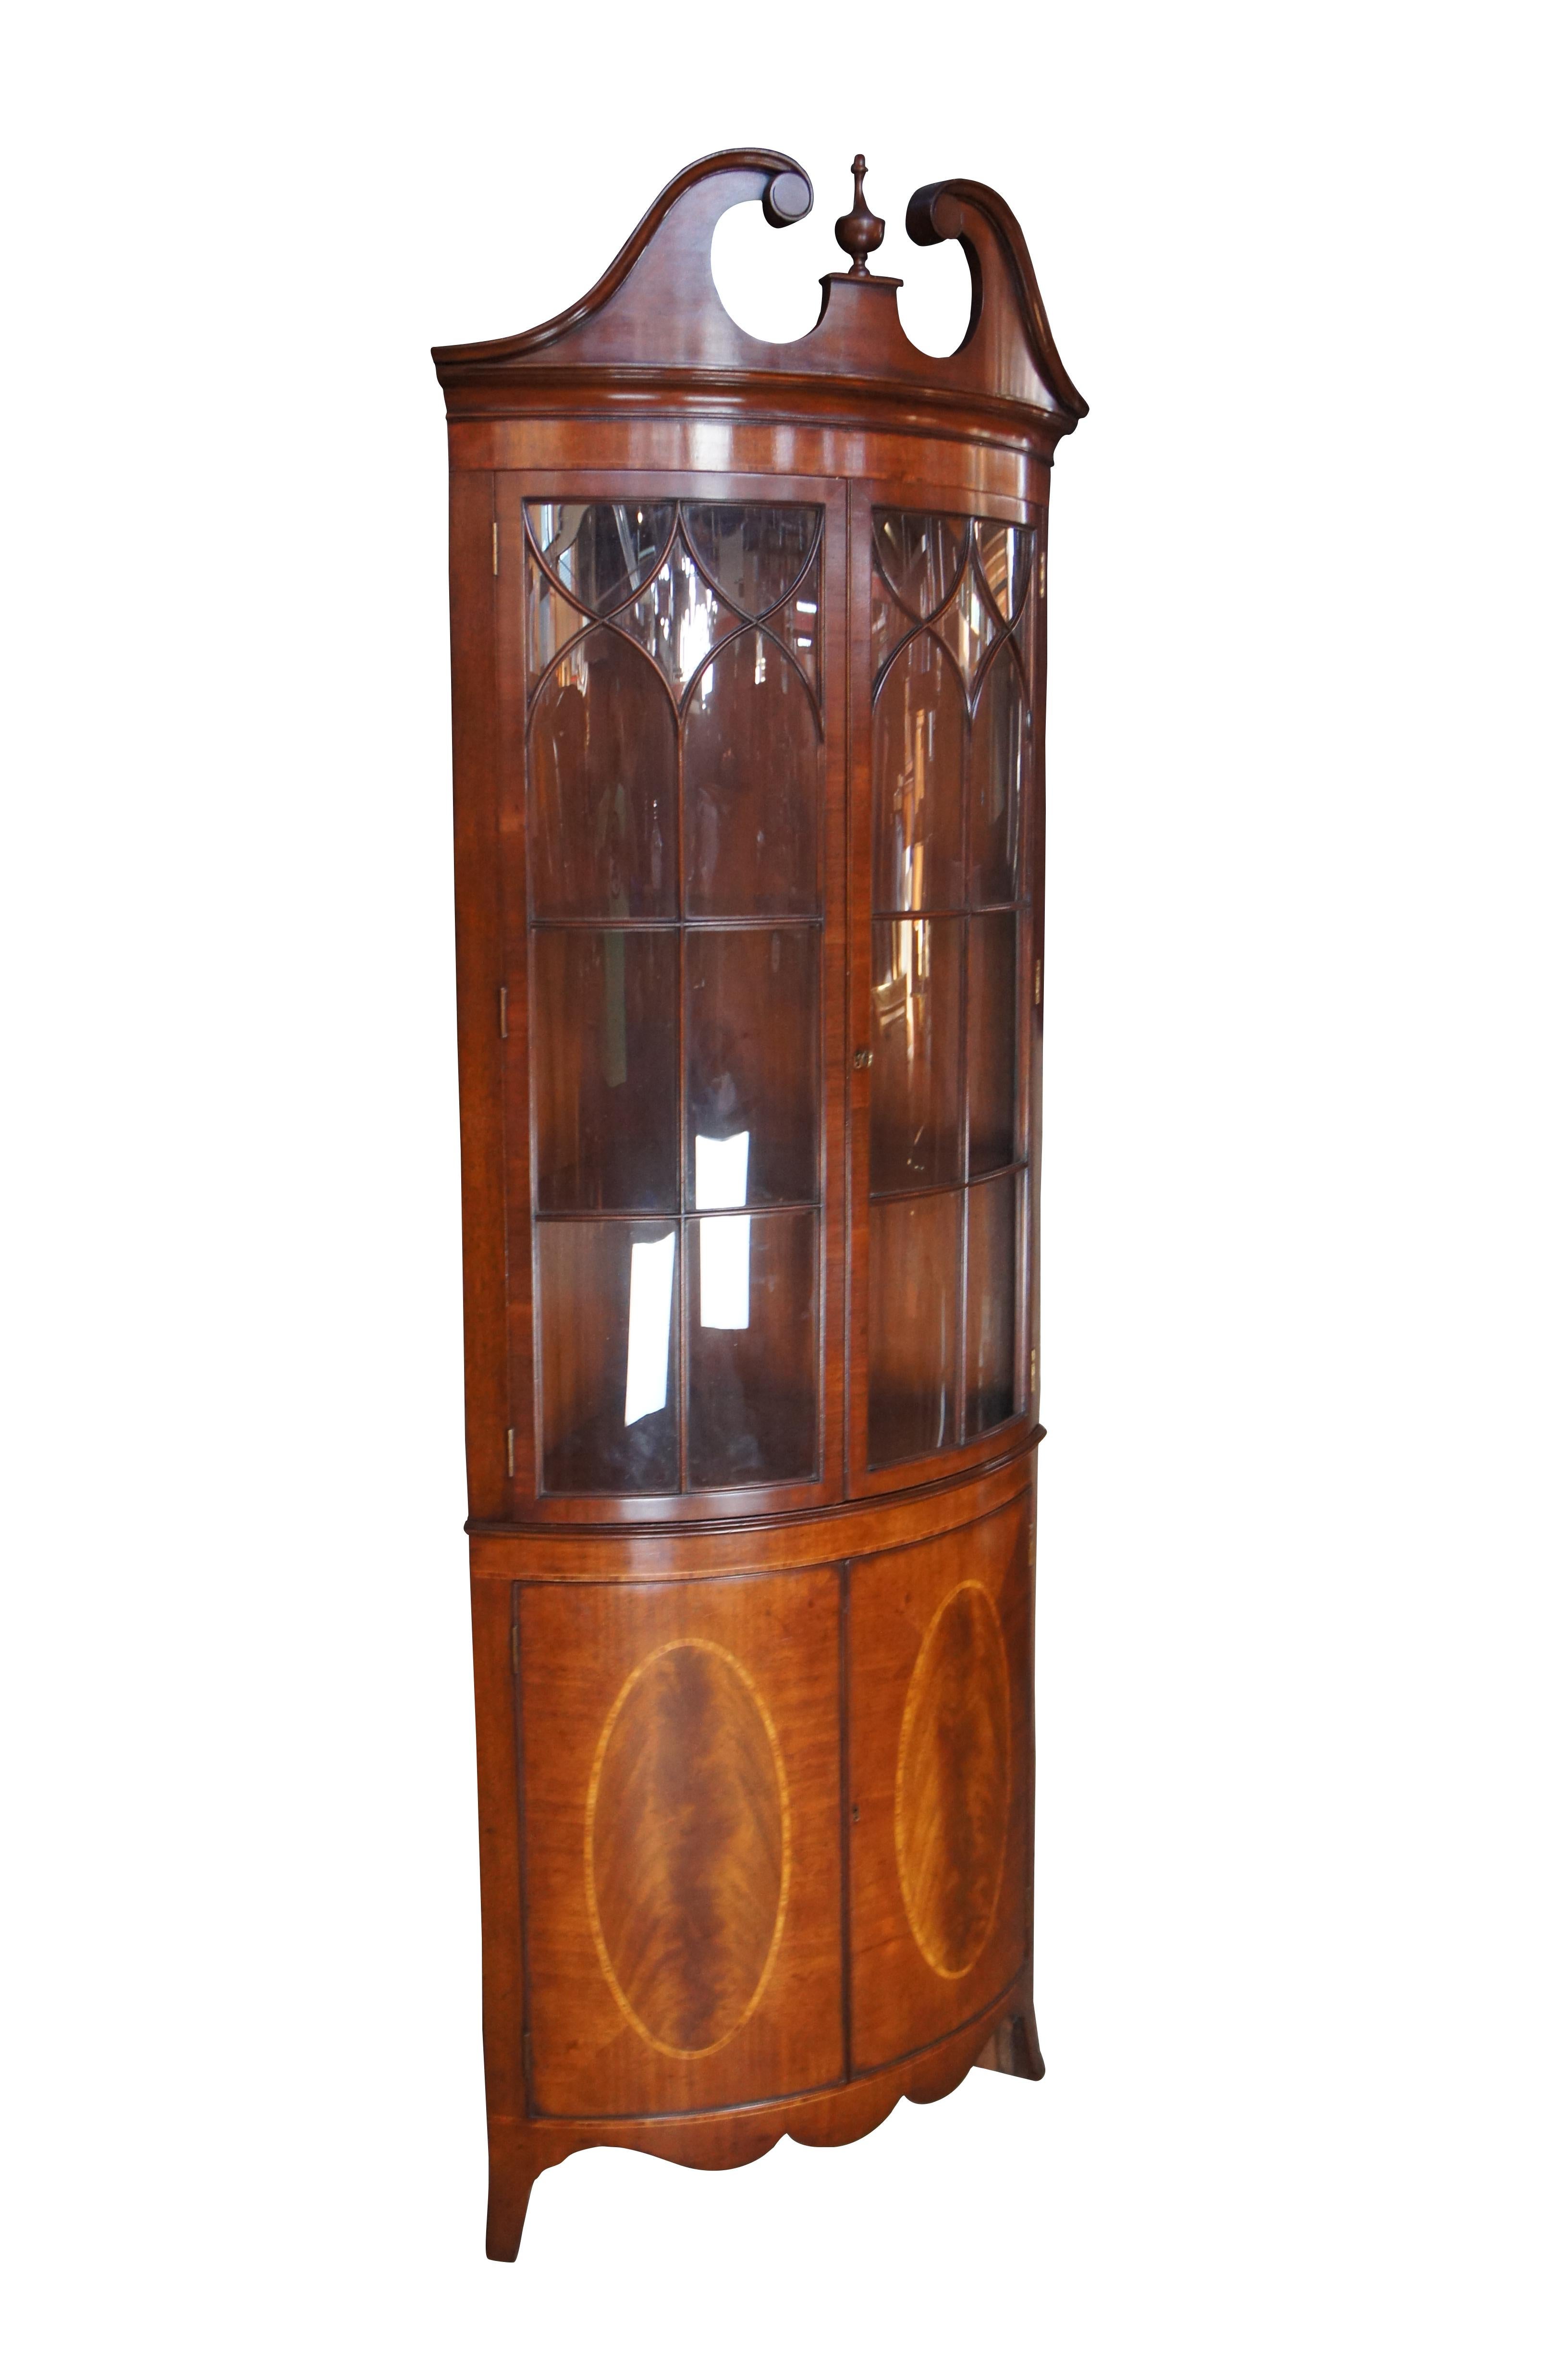 A petite English corner cabinet by Arthur Brett, circa 1980s. Features a curved form made from mahogany with a tall glass covered hutch, having ornate fretwork and two interior shelves. The base showcases two lower doors with crossbanded crotch